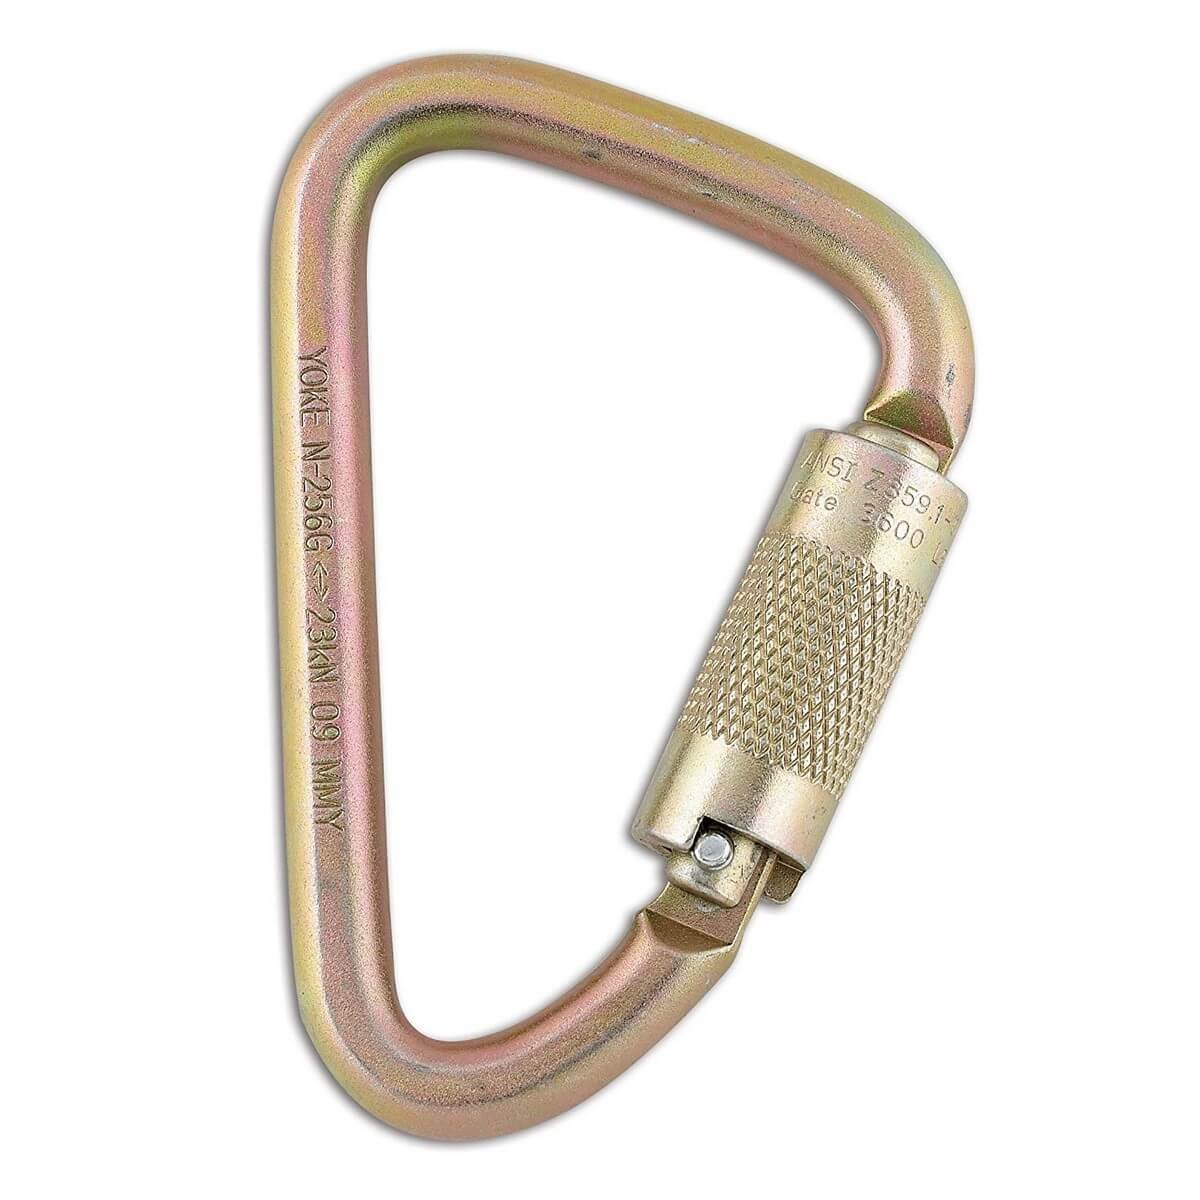 Dynamic FP843 - CARABINER CONNECTOR D-shaped with 1/4 turn twist lock